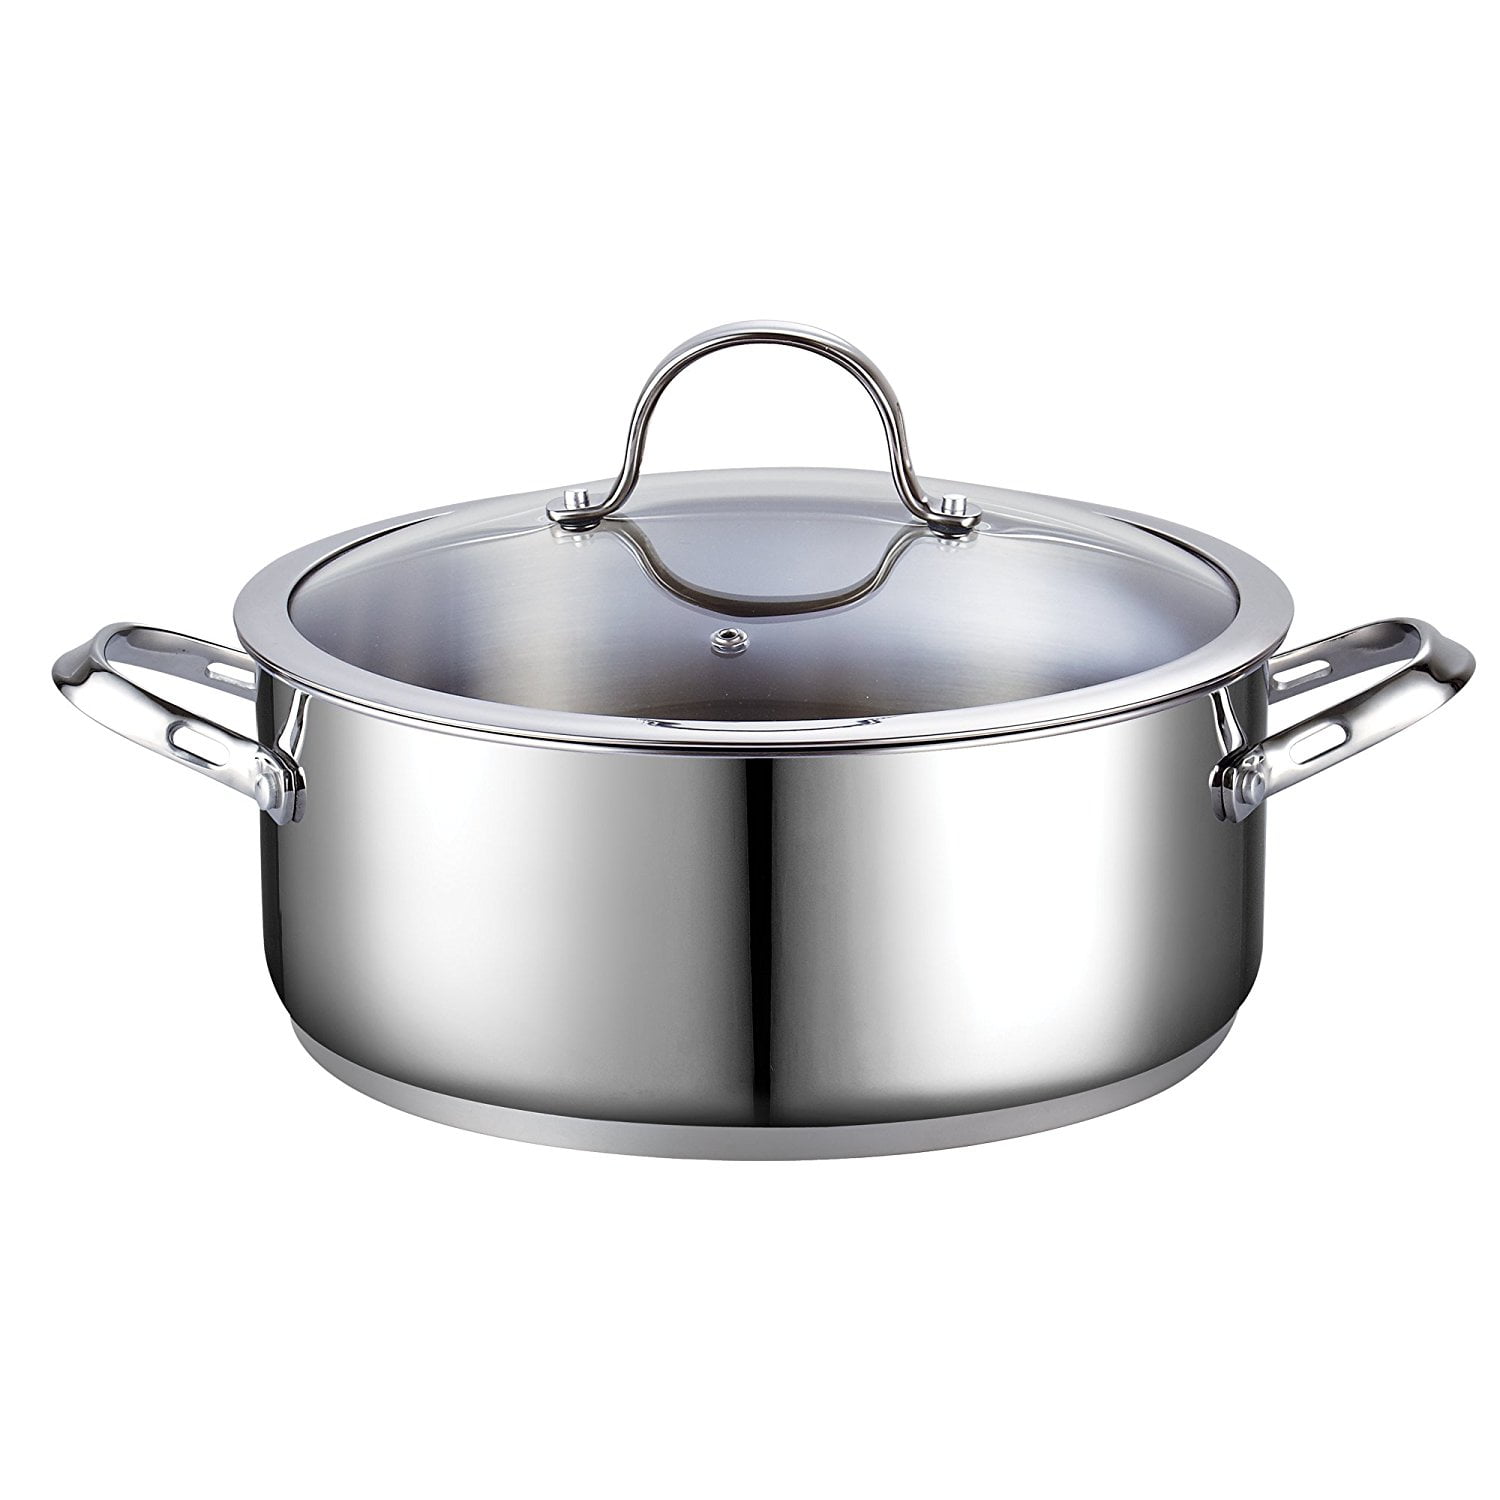 Titanium Non-Stick PFOA Free Coating Cooking Pot Casserole Dish Stock Pot HAYDEN Dutch Oven with Lid 28CM/8 Liters Induction All Hobs Suitable Cast Aluminium Covered Rose Red